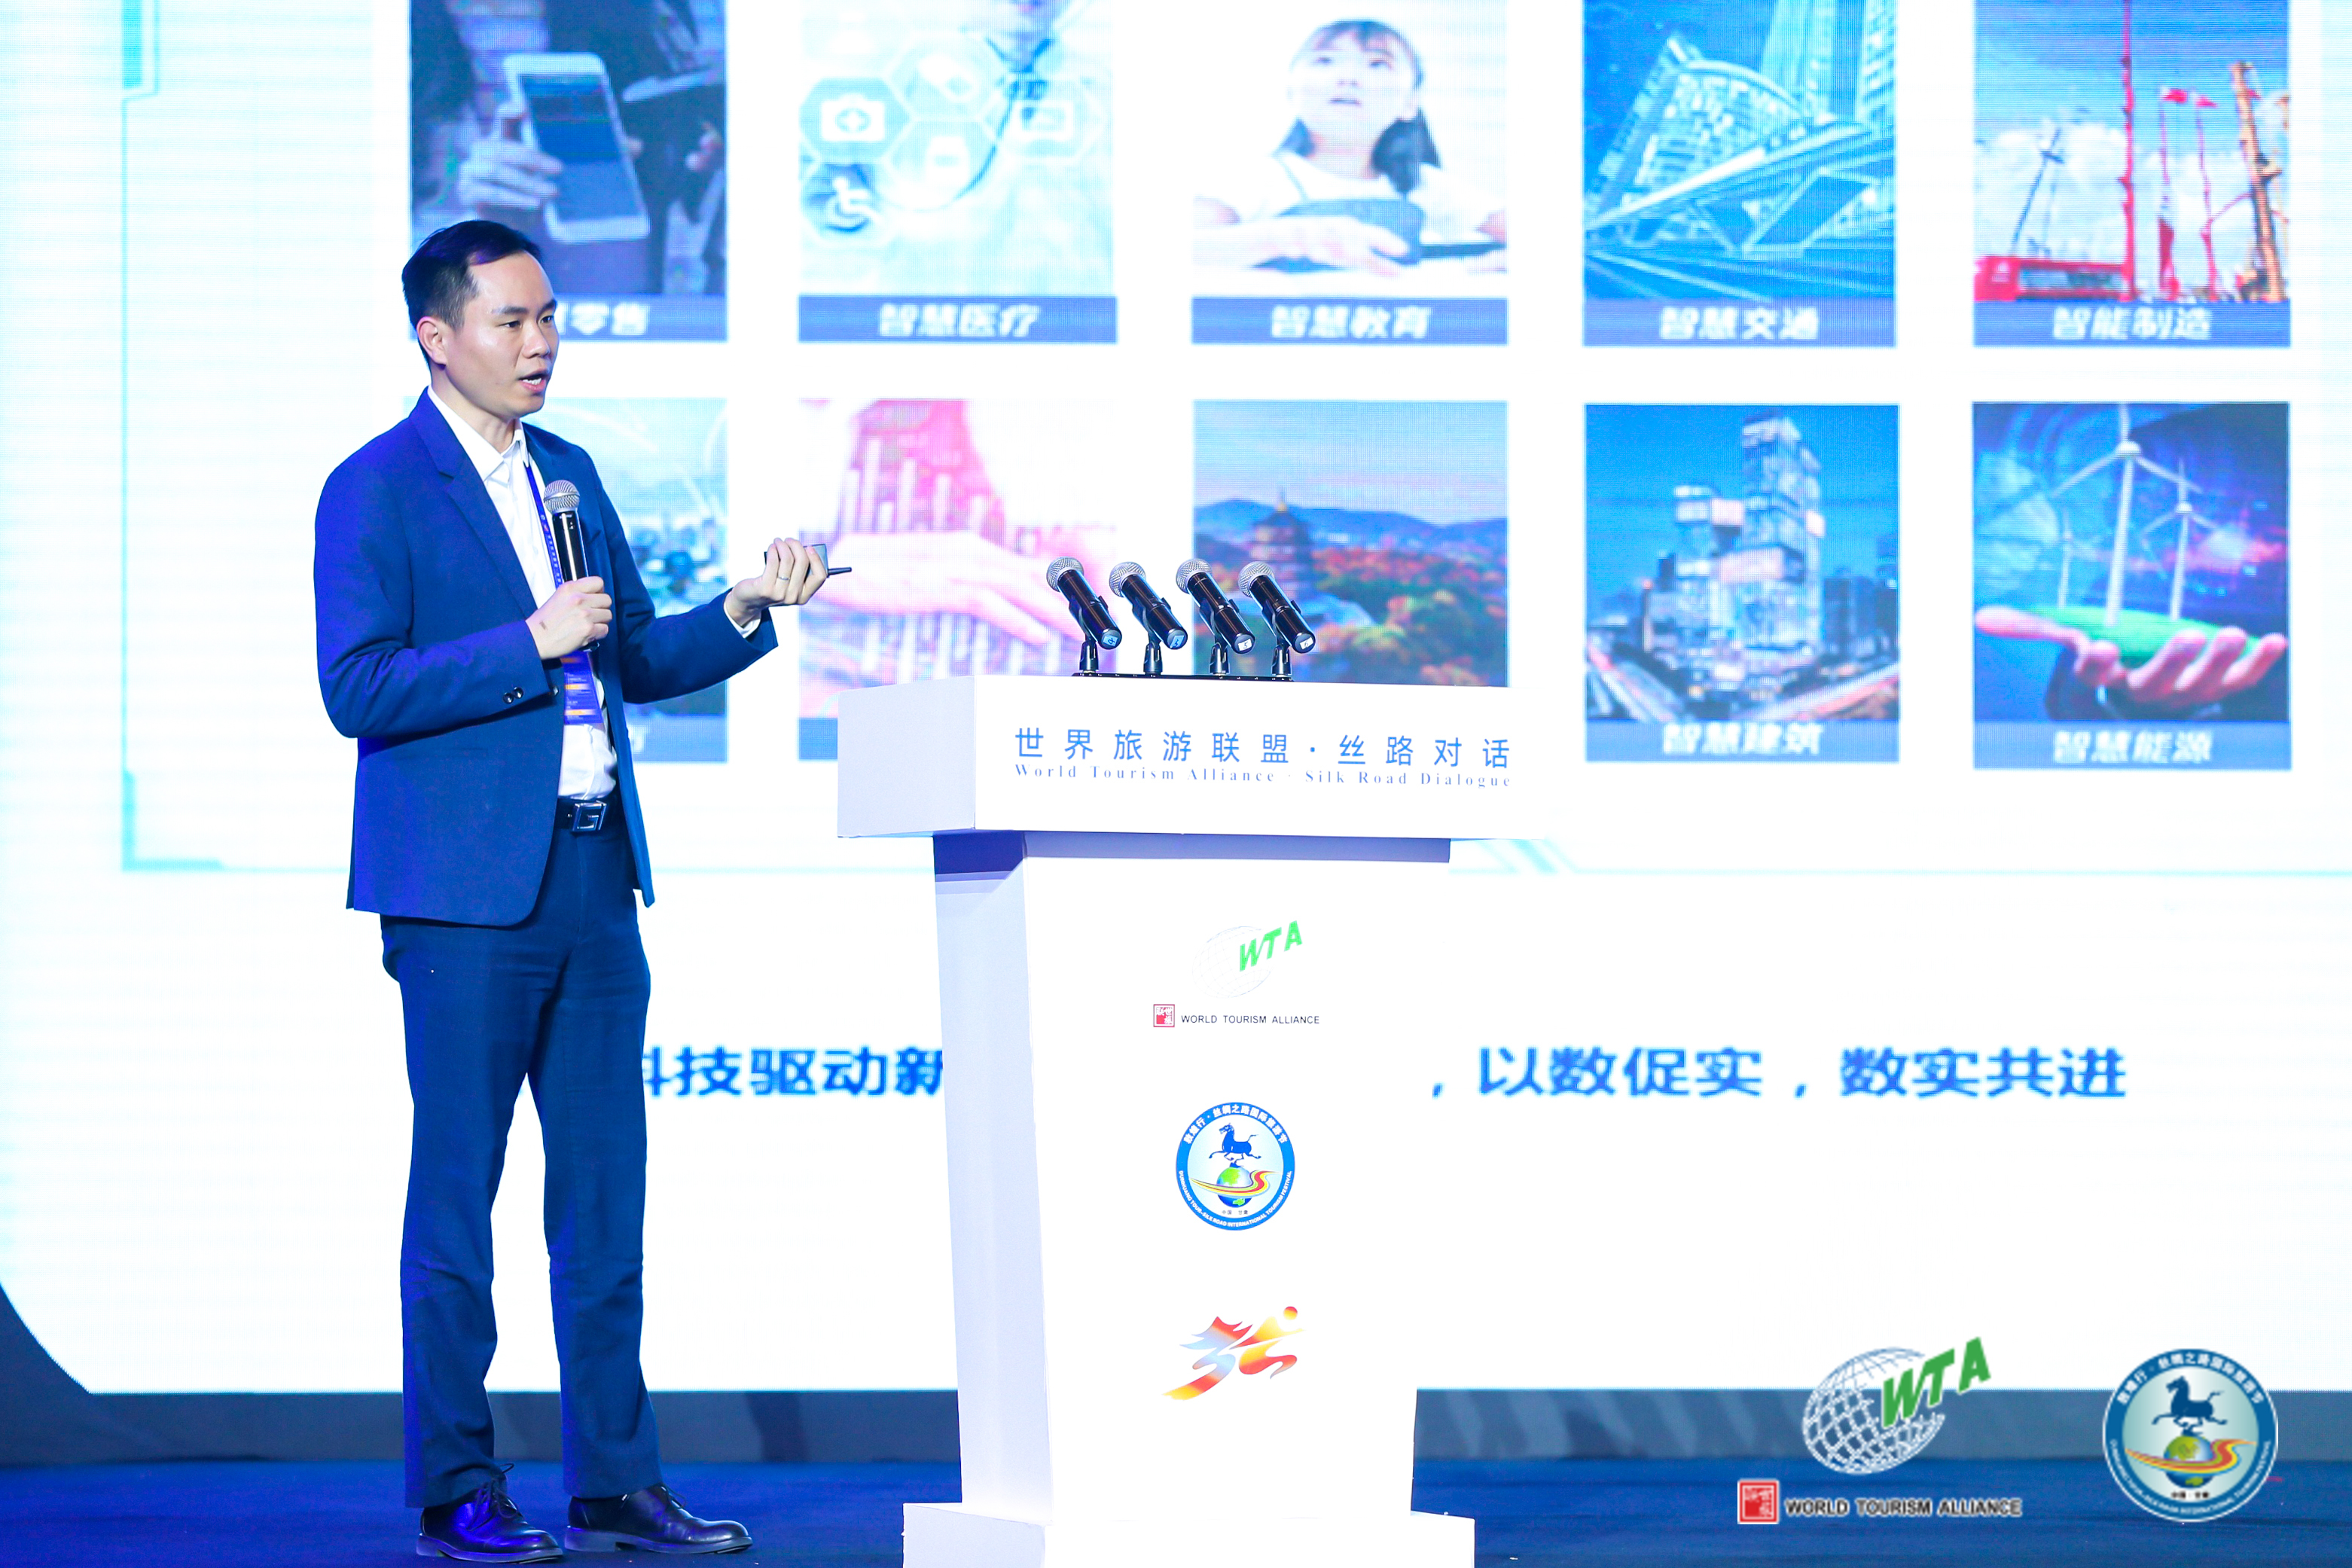 Fang Tengfei, Vice President of Tencent Cloud / General Manager of Cultural and TourismIndustry, Tencent